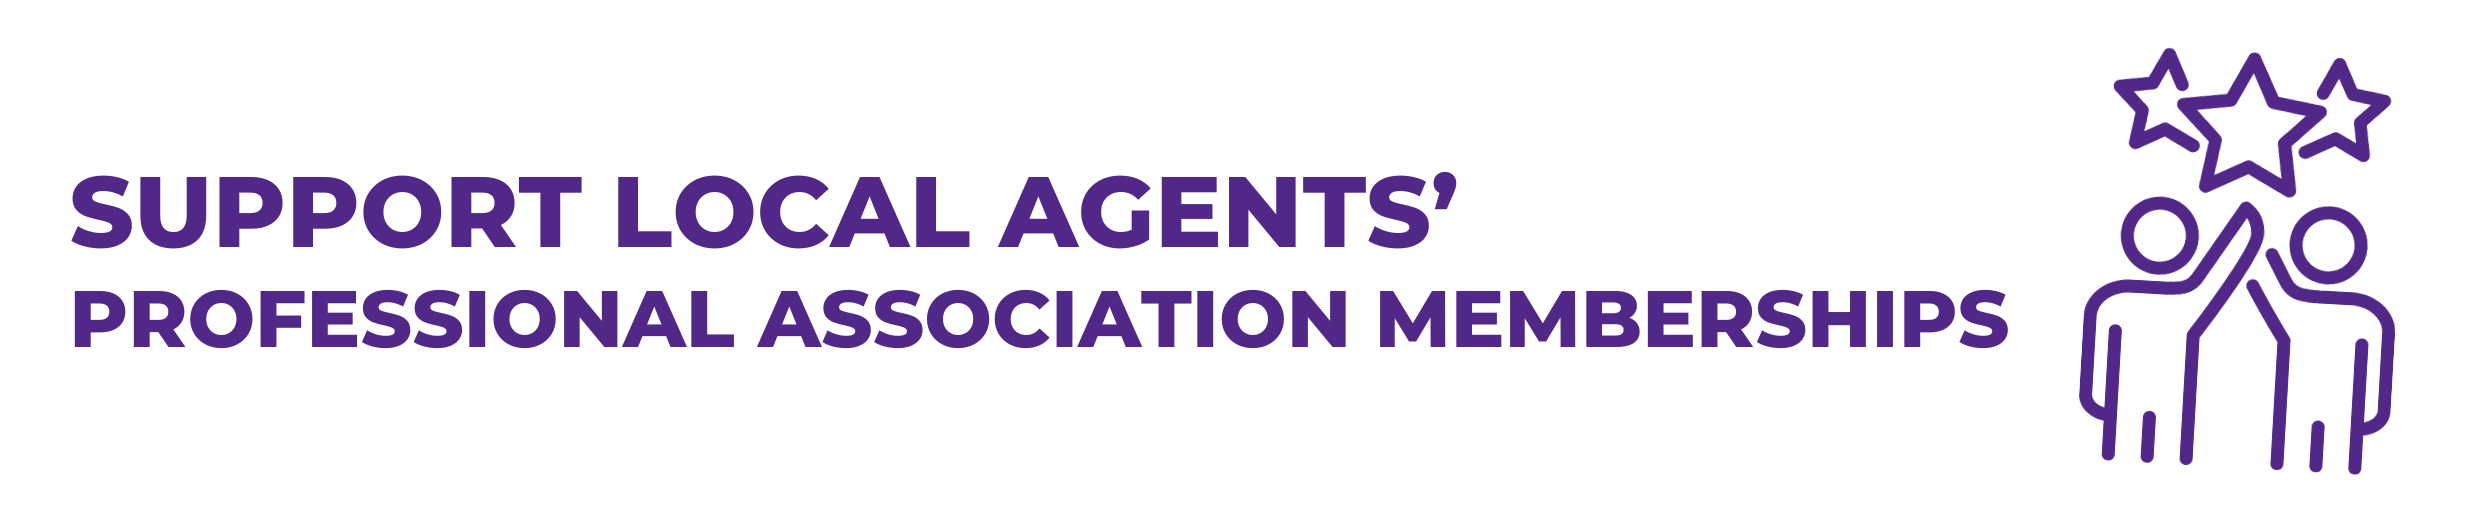 Support Local Agents' Professional Association Memberships